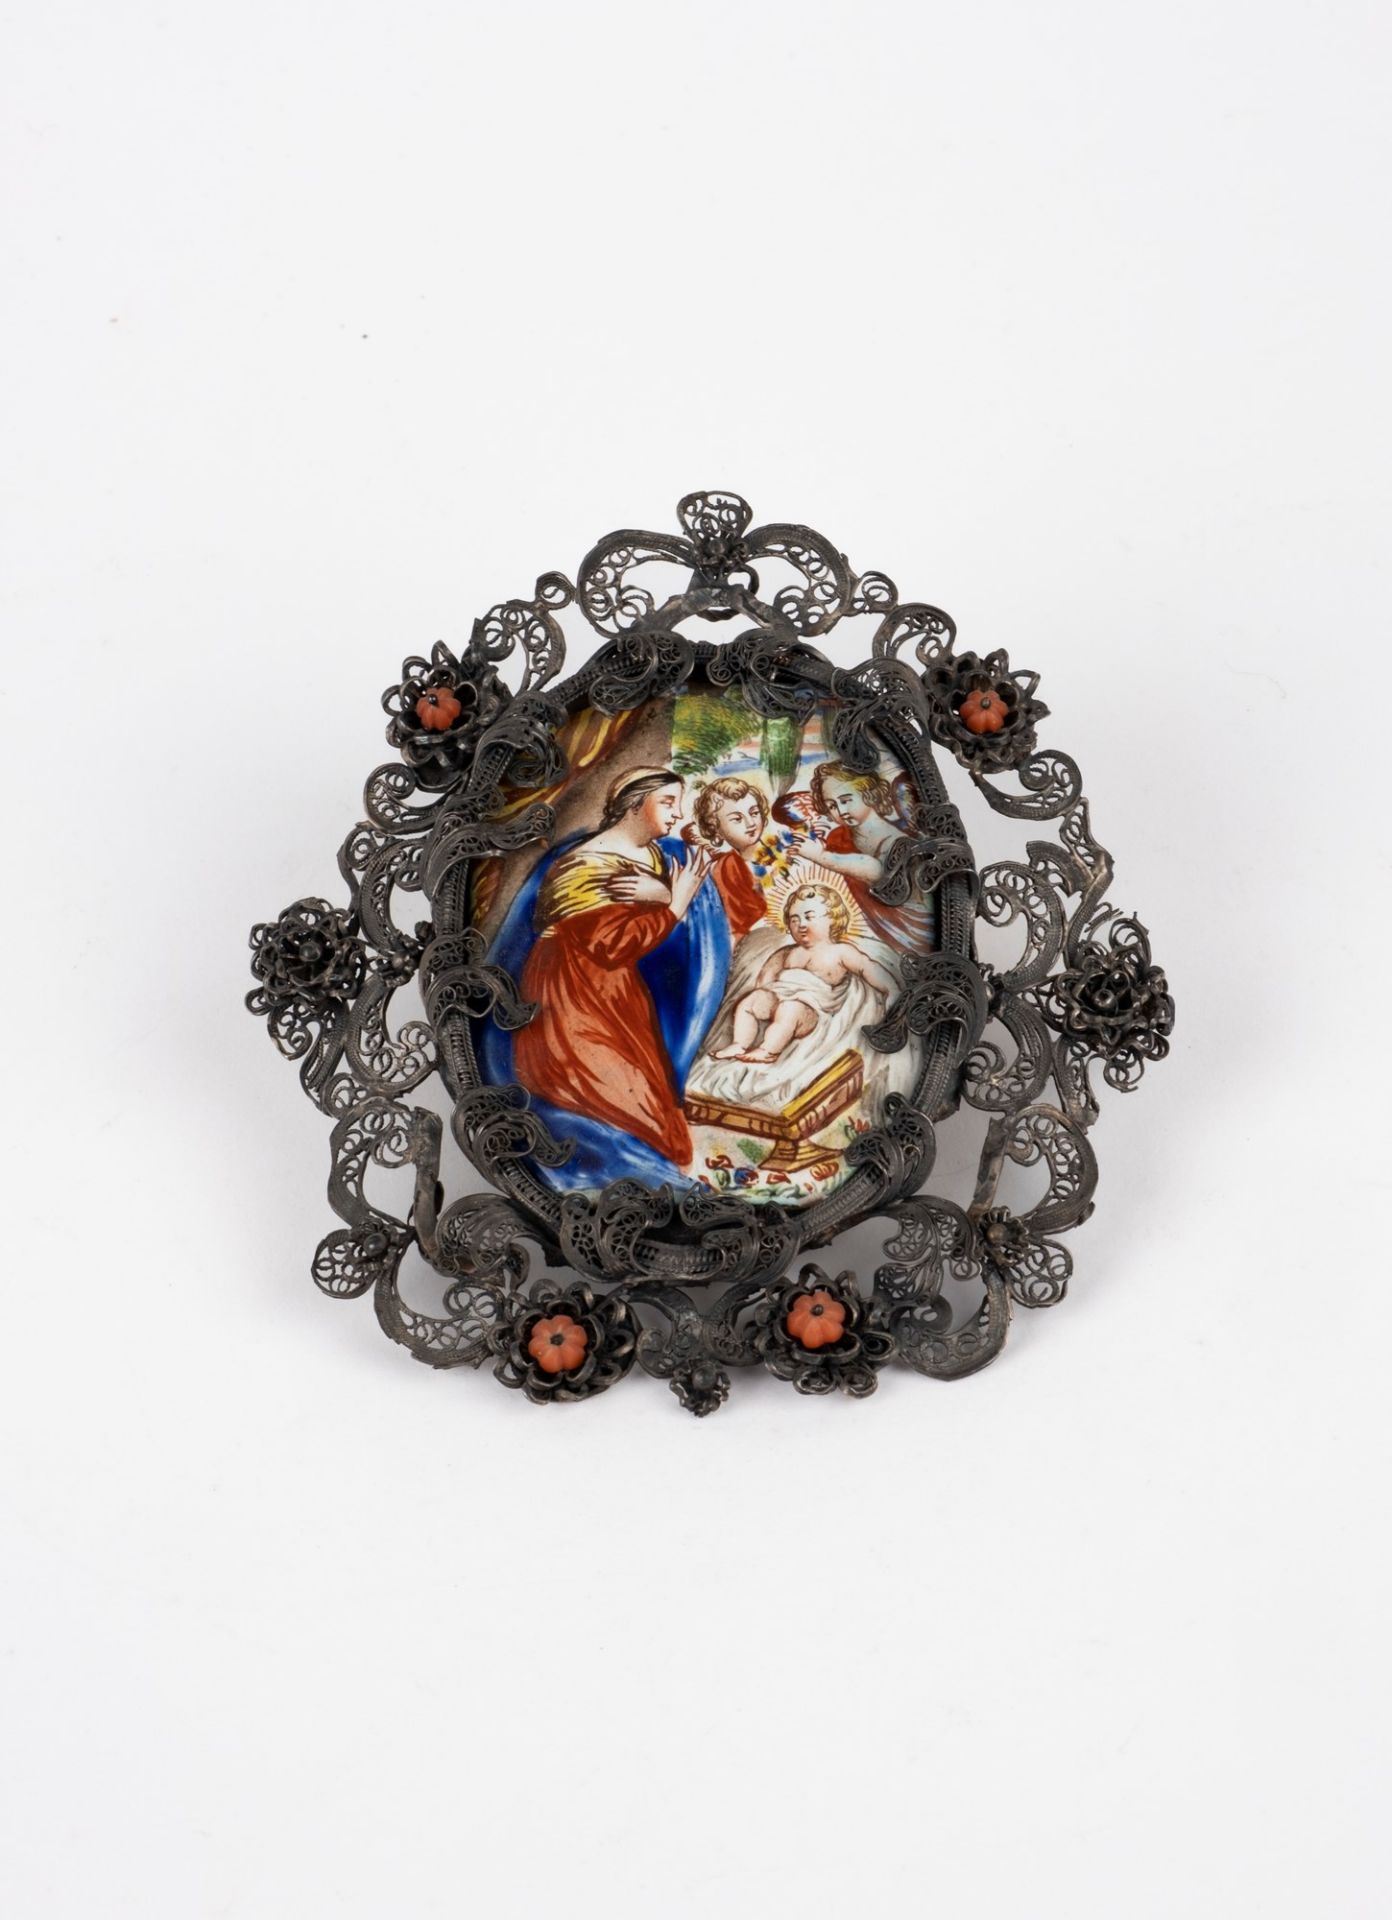 ☼ Enamel miniature depicting "Madonna with child and angels"